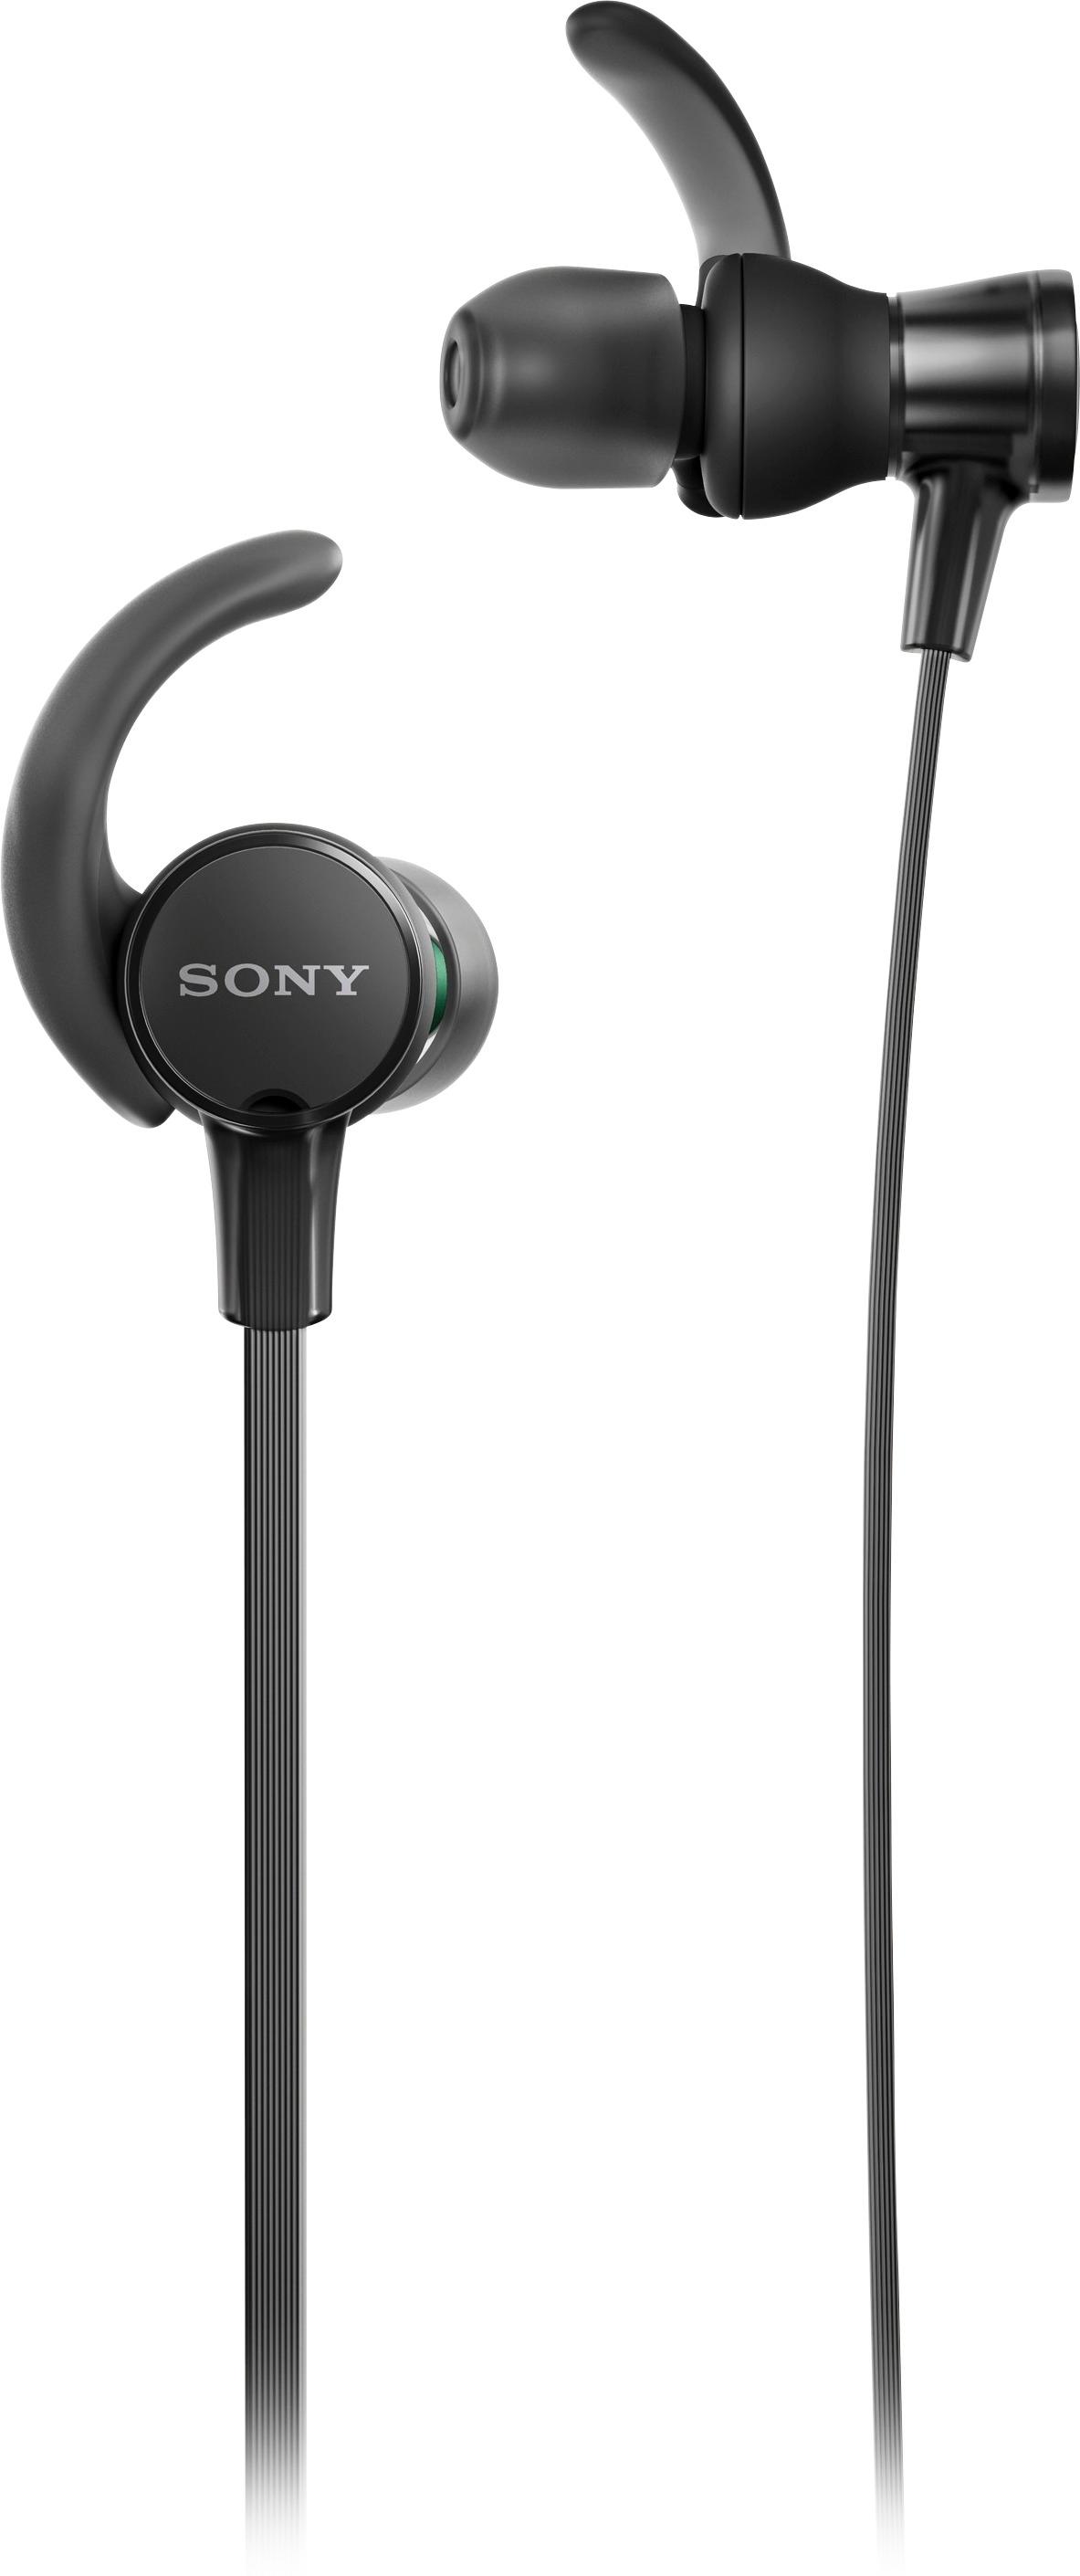 Sony Extra Bass Bluetooth Headphones, Wireless Sports Earbuds with  Mic/Microphone, IPX4 Splash Proof Stereo Comfort Gym Running Workout up to  8.5 Hour Battery, Black (International Version) 